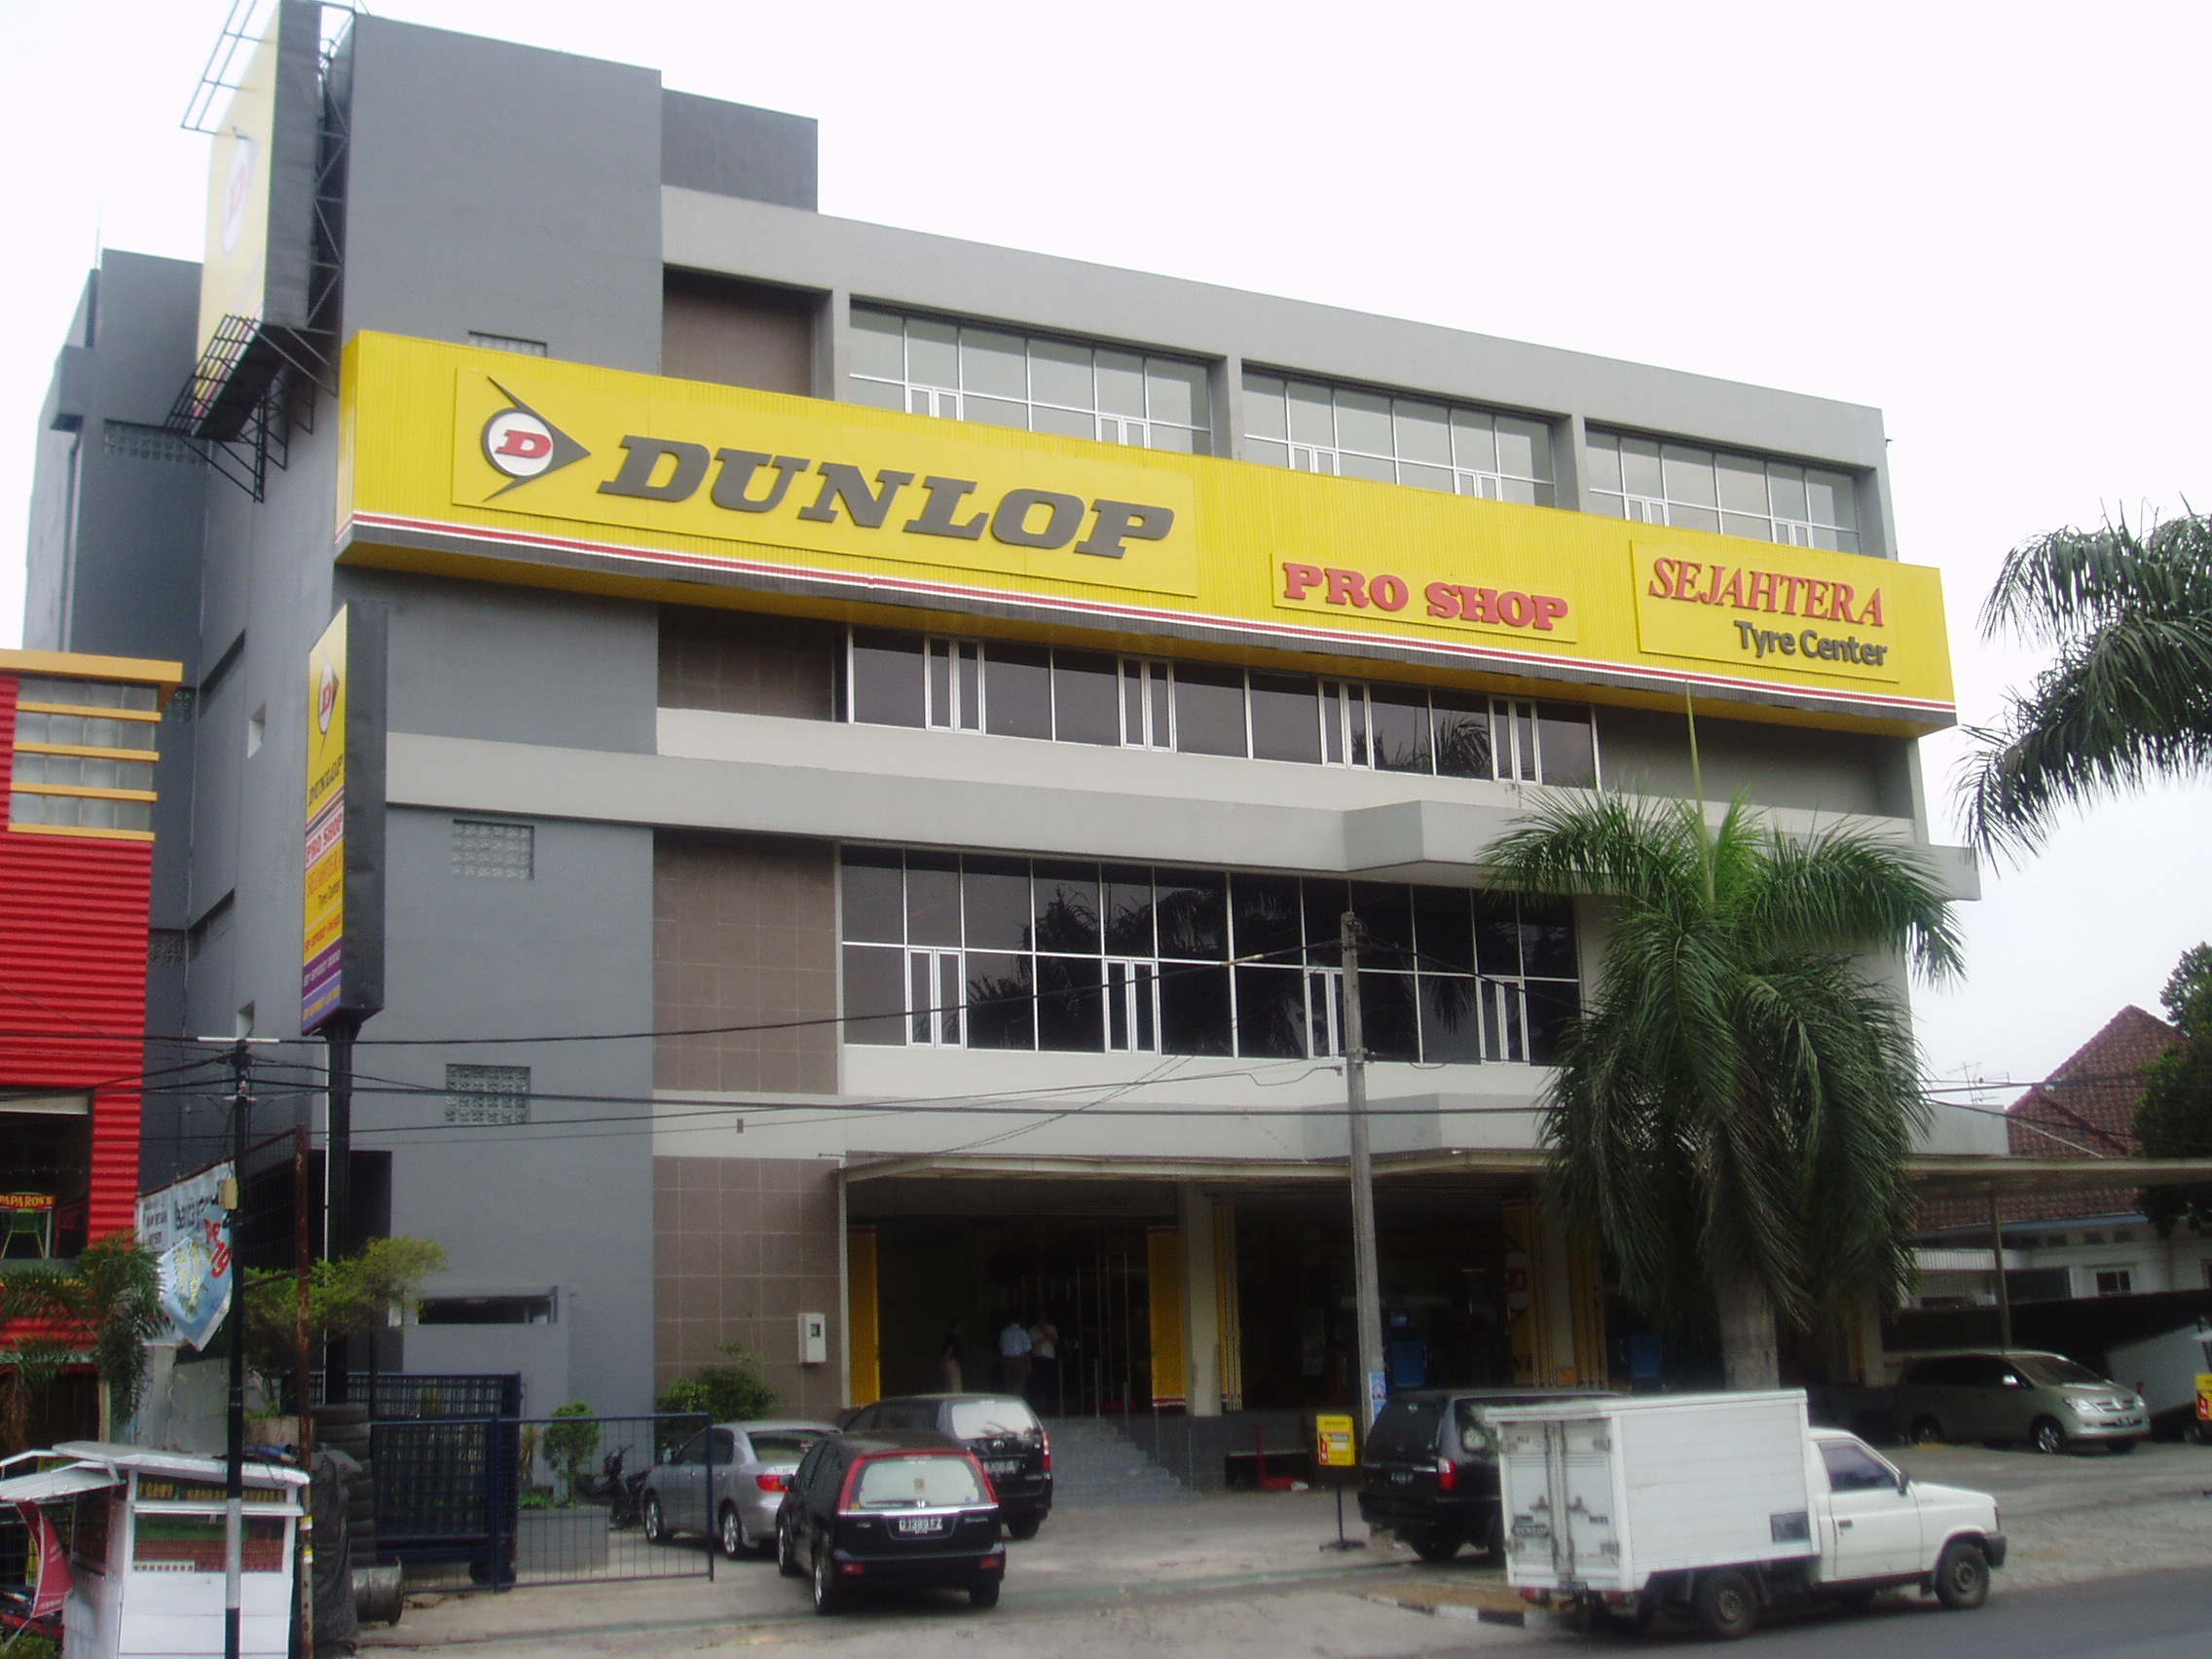 Sejahtera Tyre Center